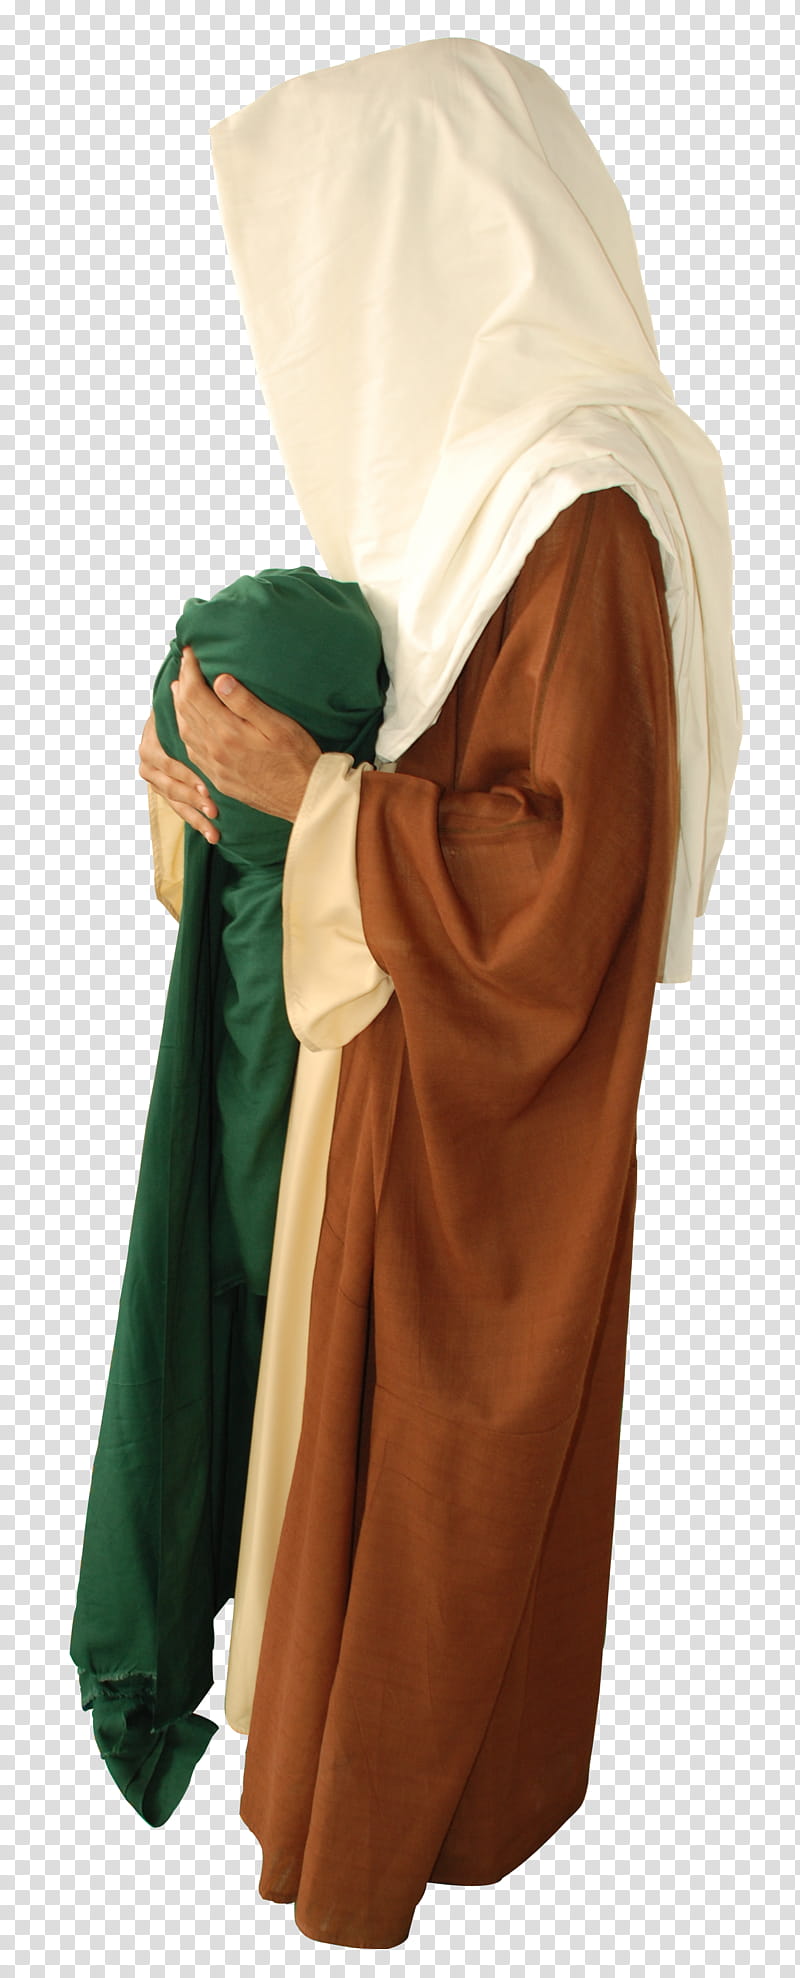 Arab old style clothes , person wearing white headscarf transparent background PNG clipart